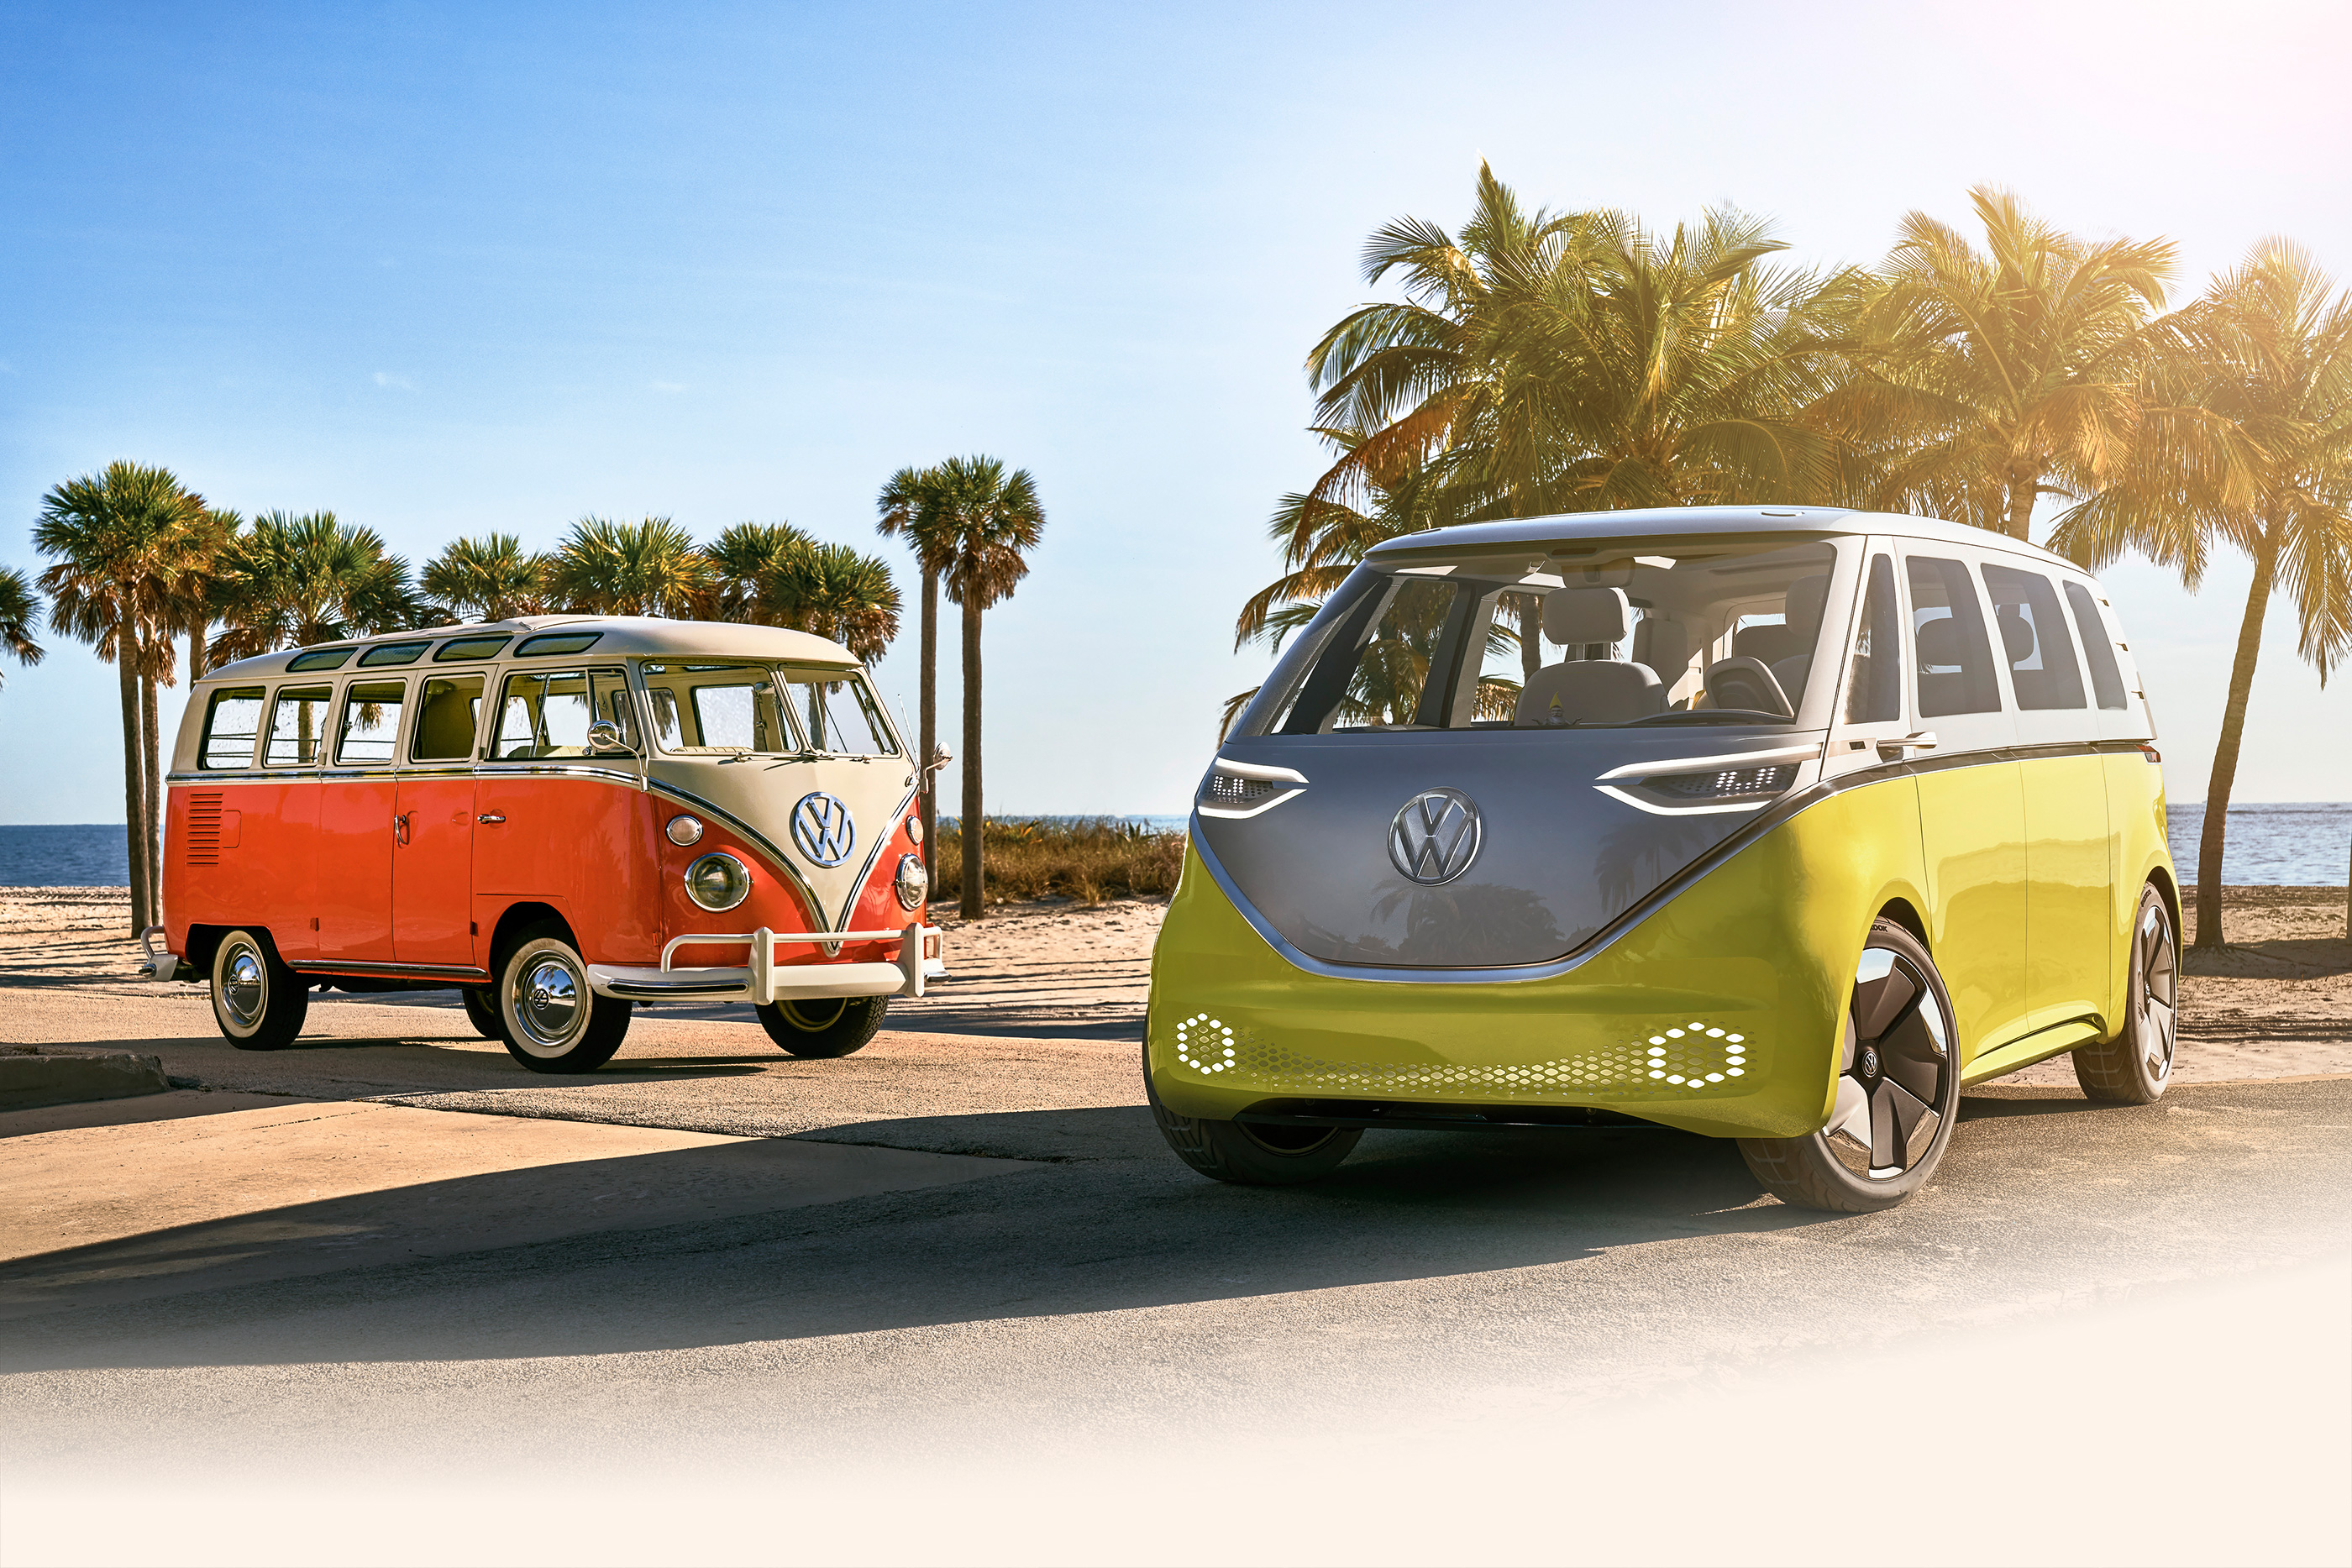 It's official: The VW Bus is back, and it's electric – Newsroom